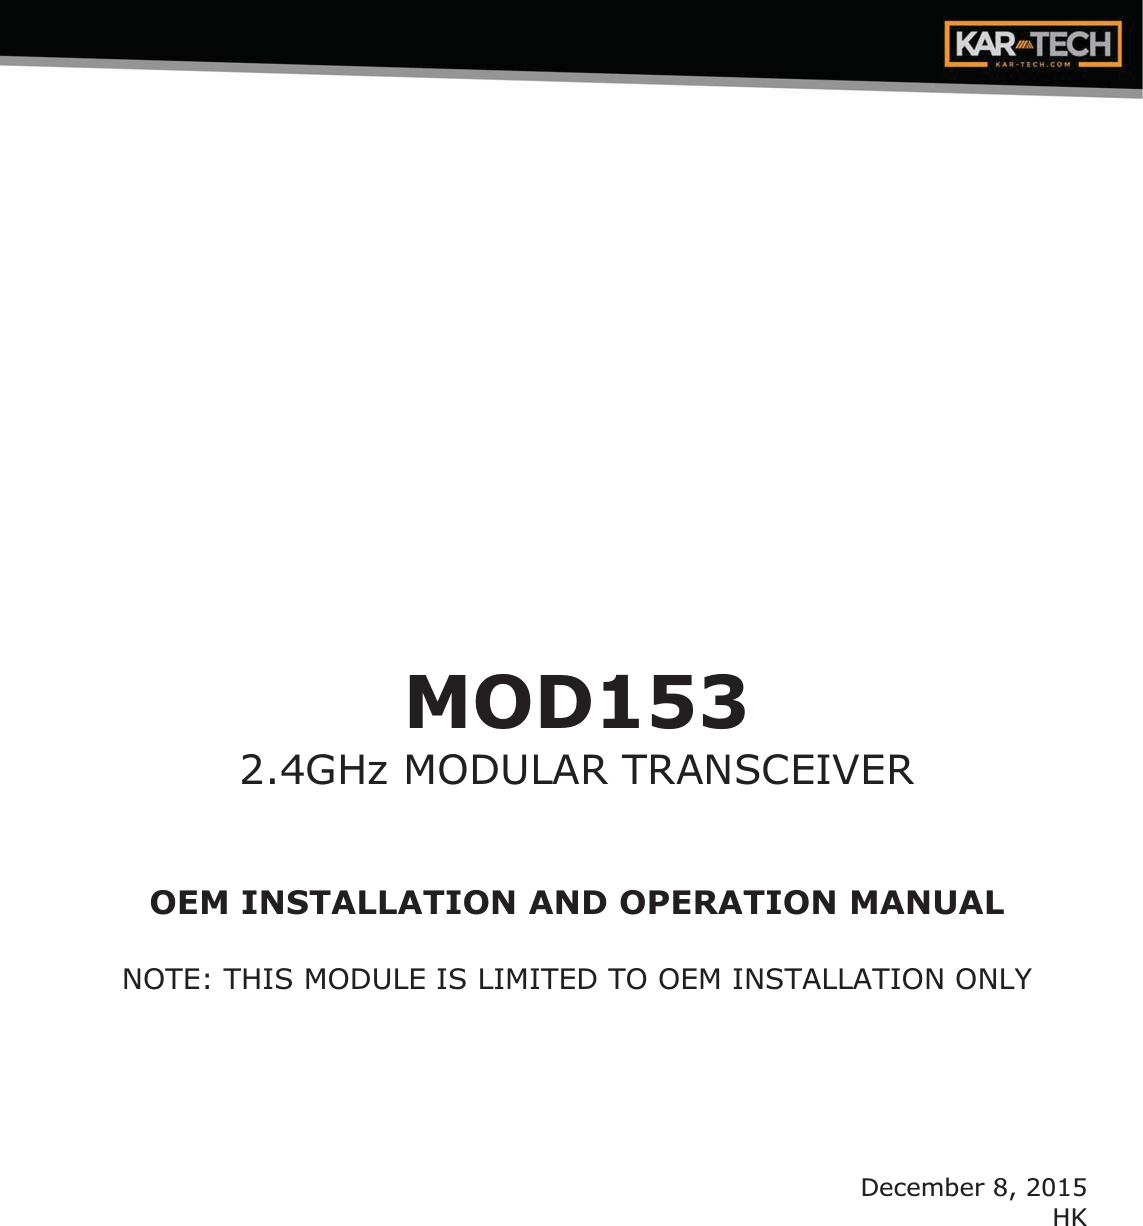 MOD1532.4GHz MODULAR TRANSCEIVER OEM INSTALLATION AND OPERATION MANUAL NOTE: THIS MODULE IS LIMITED TO OEM INSTALLATION ONLY December 8, 2015 HK